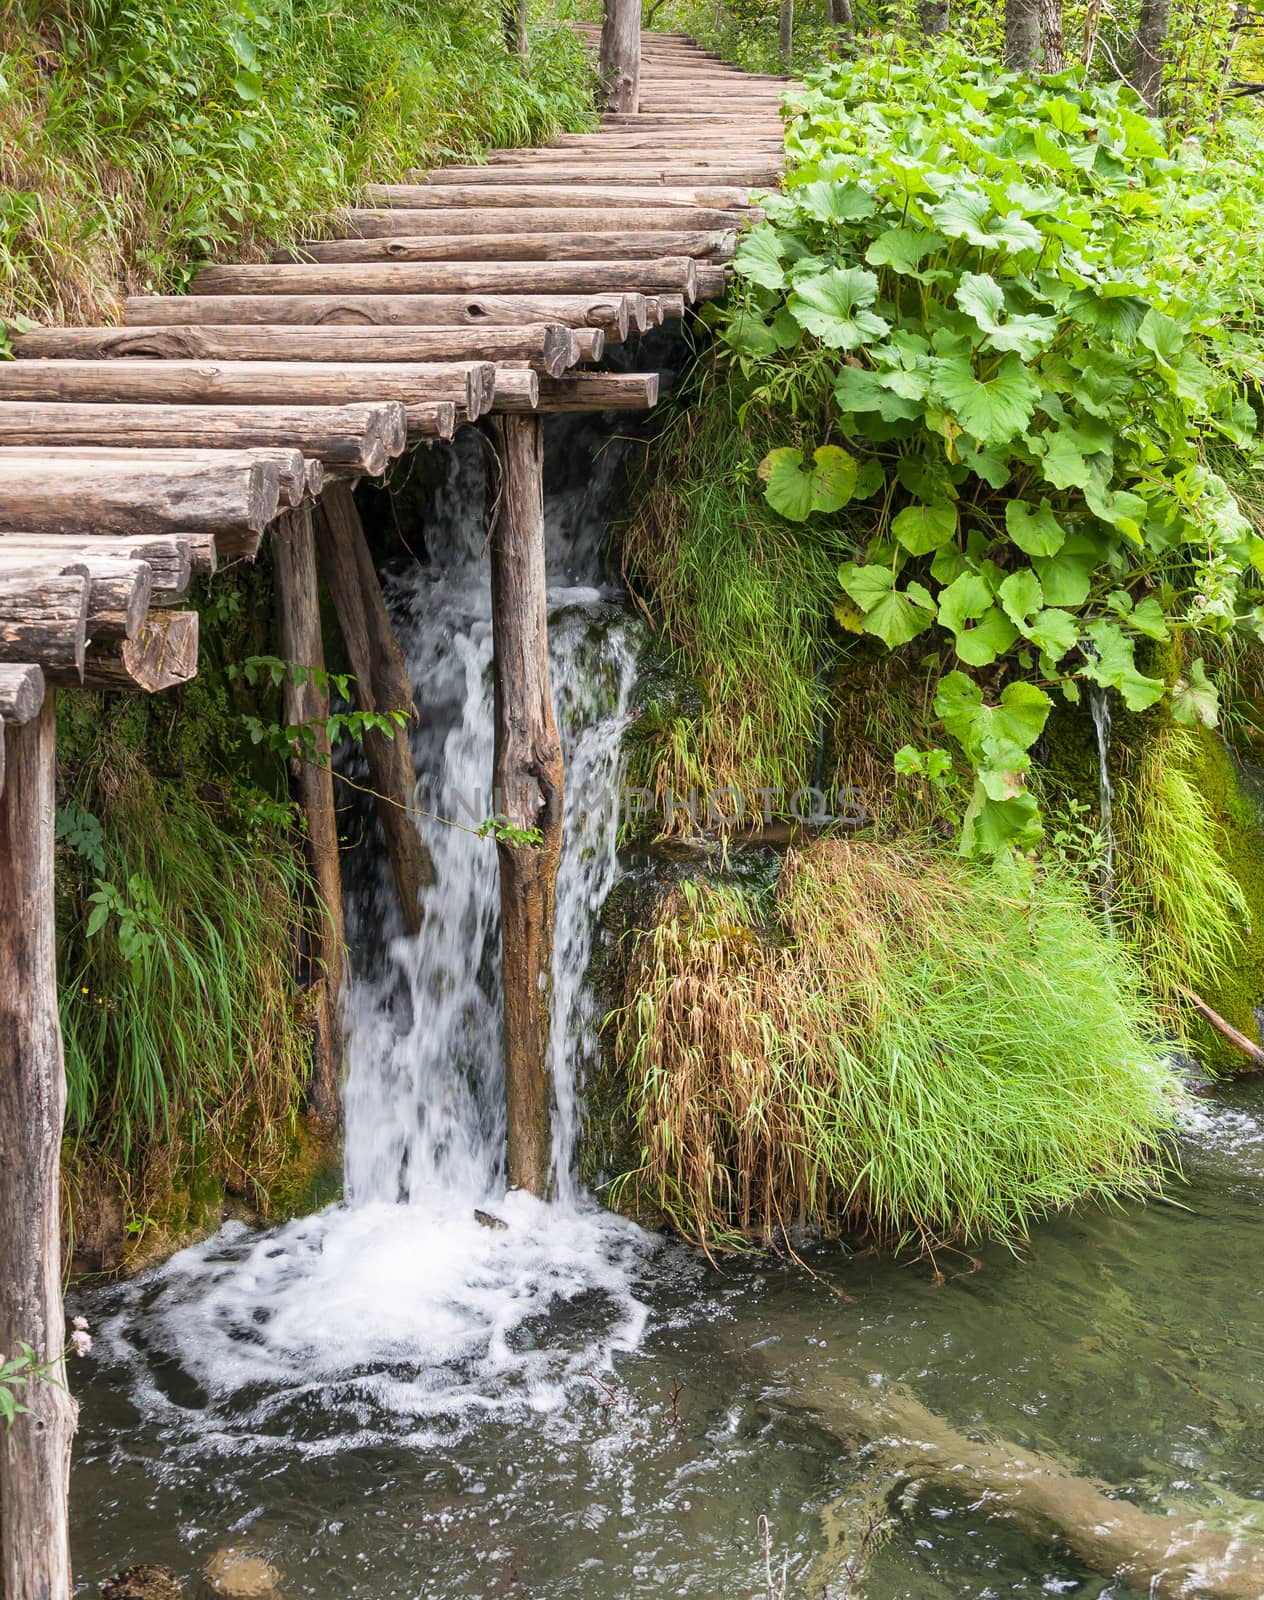 Waterfall under wooden path in Plitvice Lakes National Park